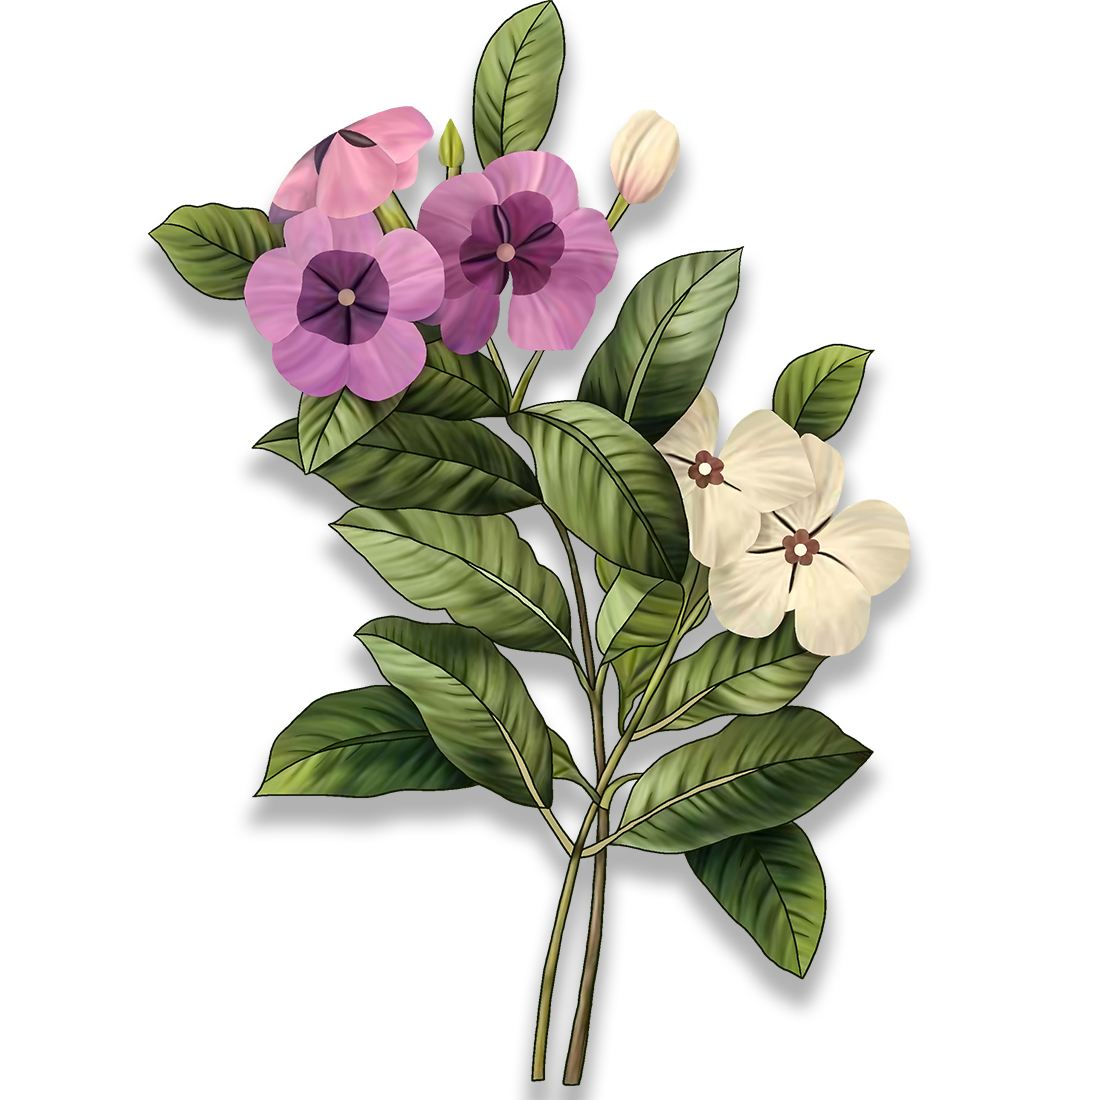 g.d collection 2 madagascar periwinkle flowers for digital print in png background 639